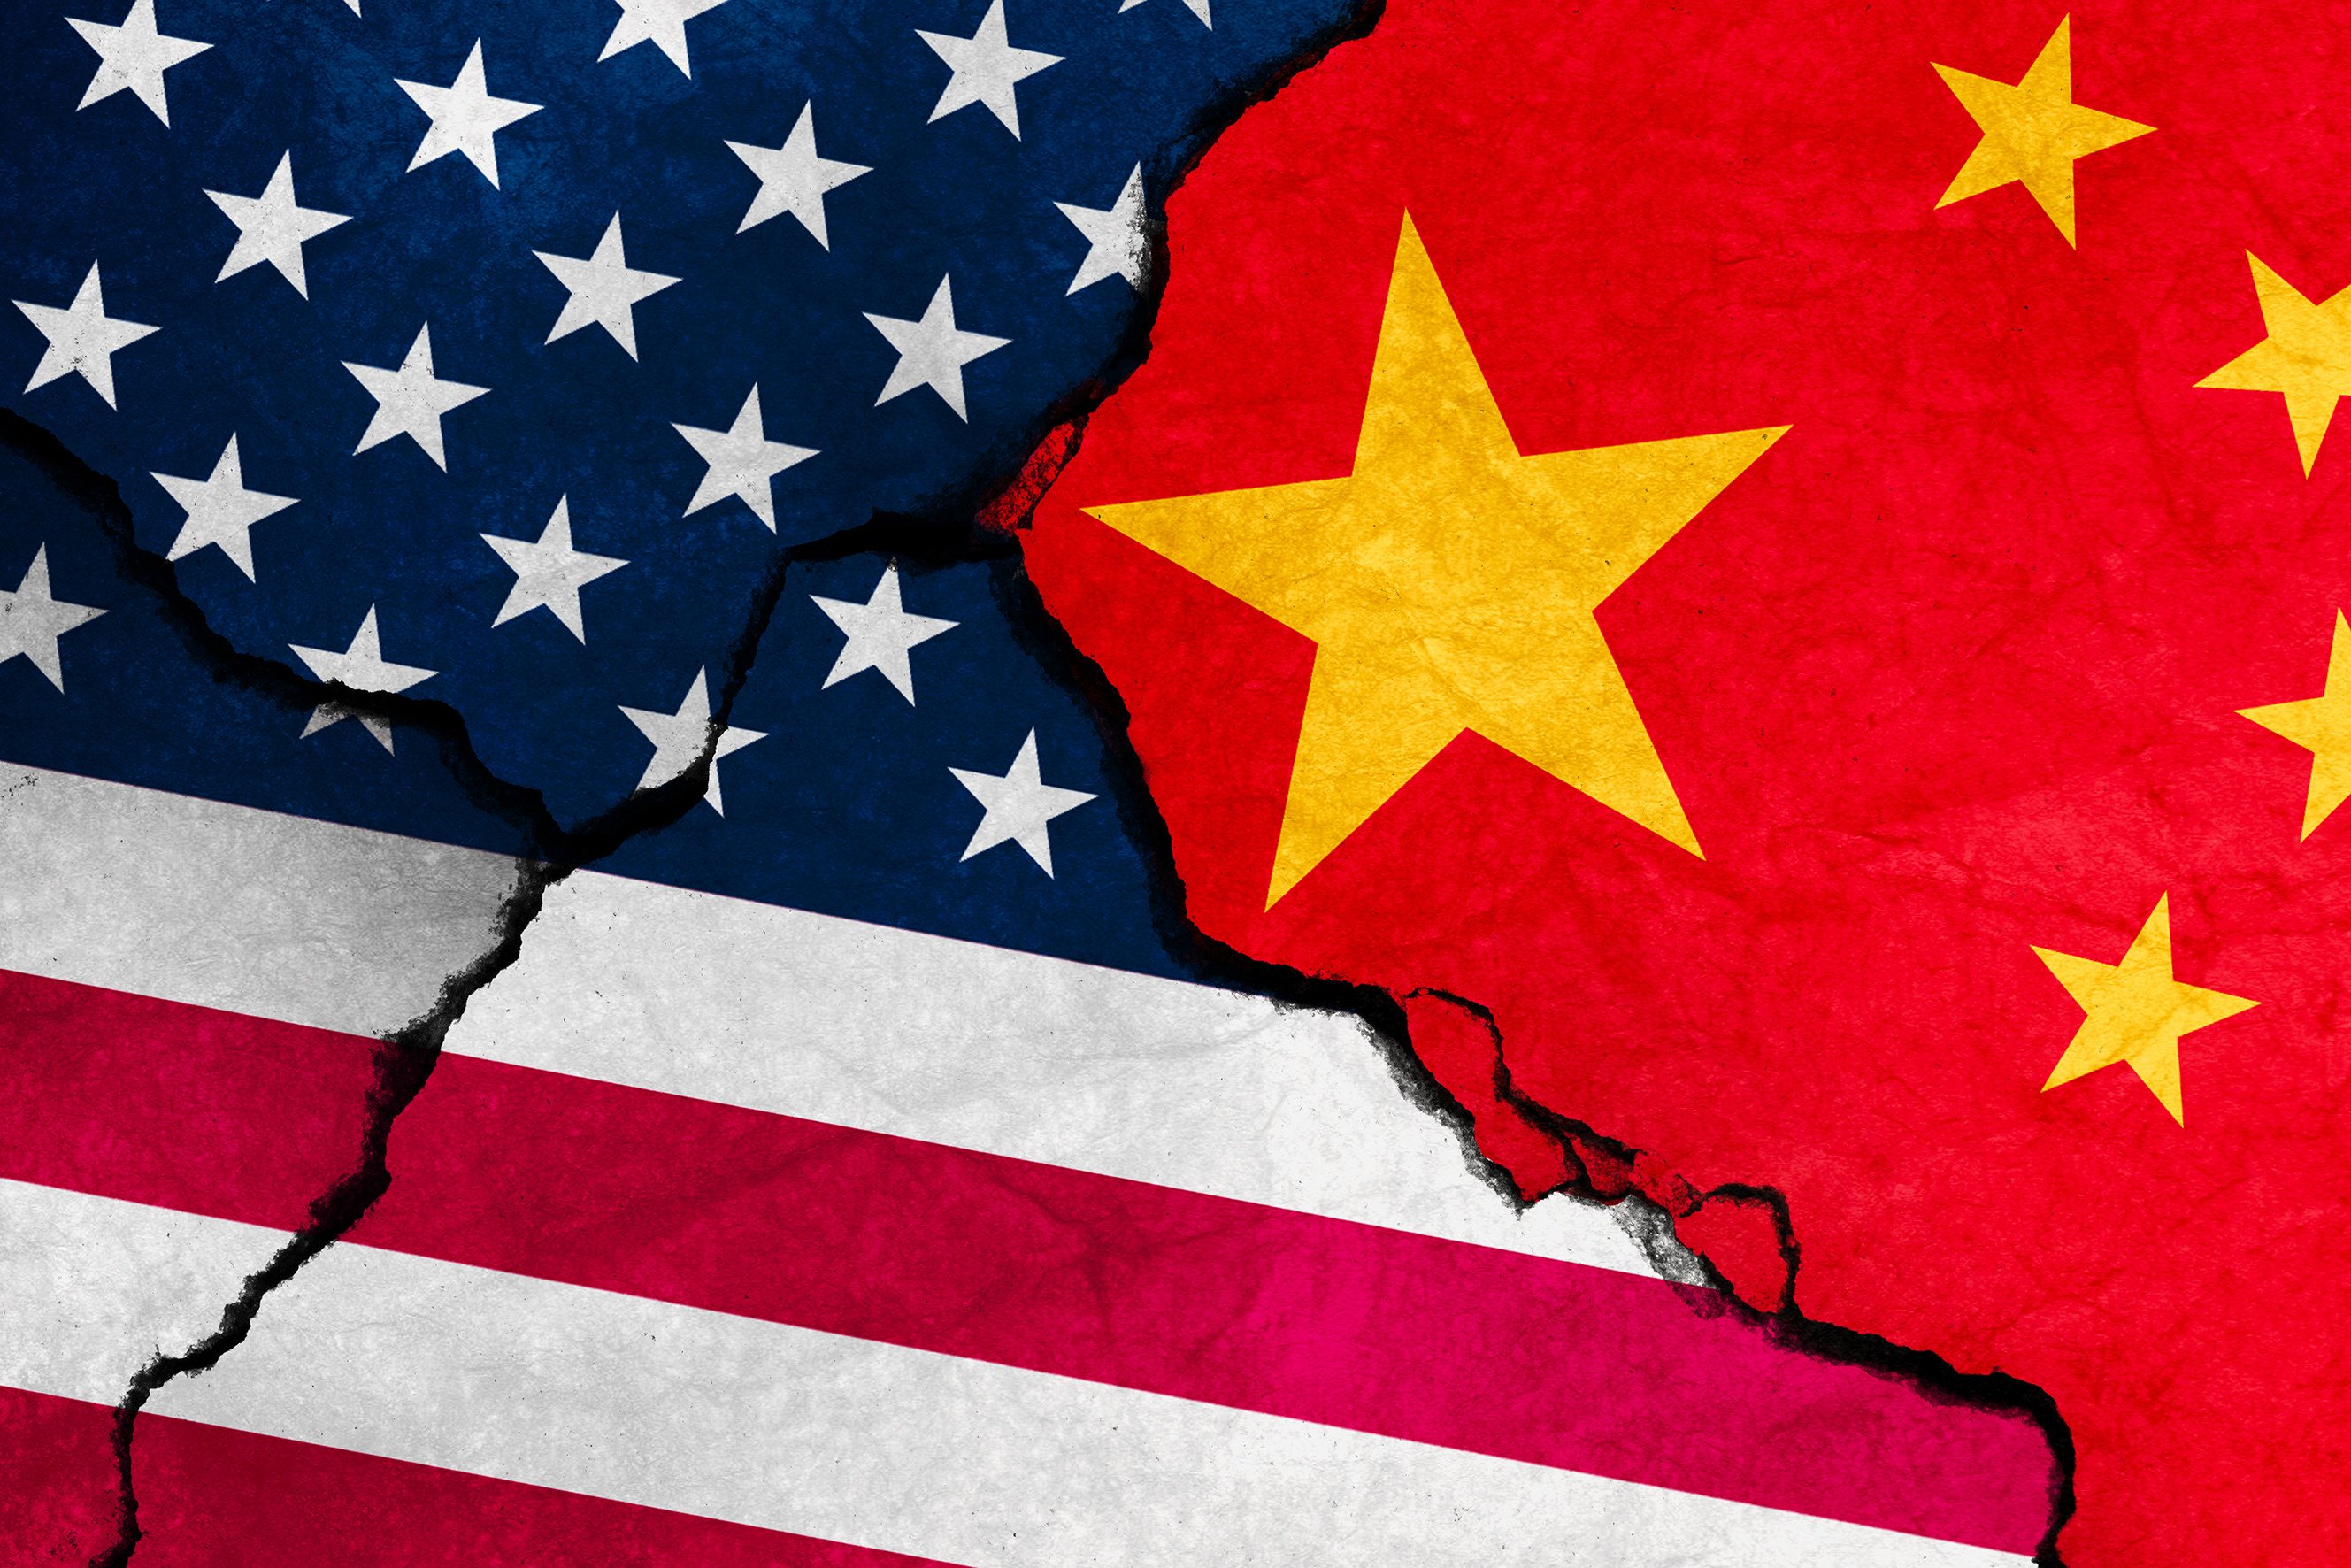 The top Chinese diplomat noted “some improvements” in relations with the US but accused Washington of “devising various tactics to suppress China”. Image: Shutterstock